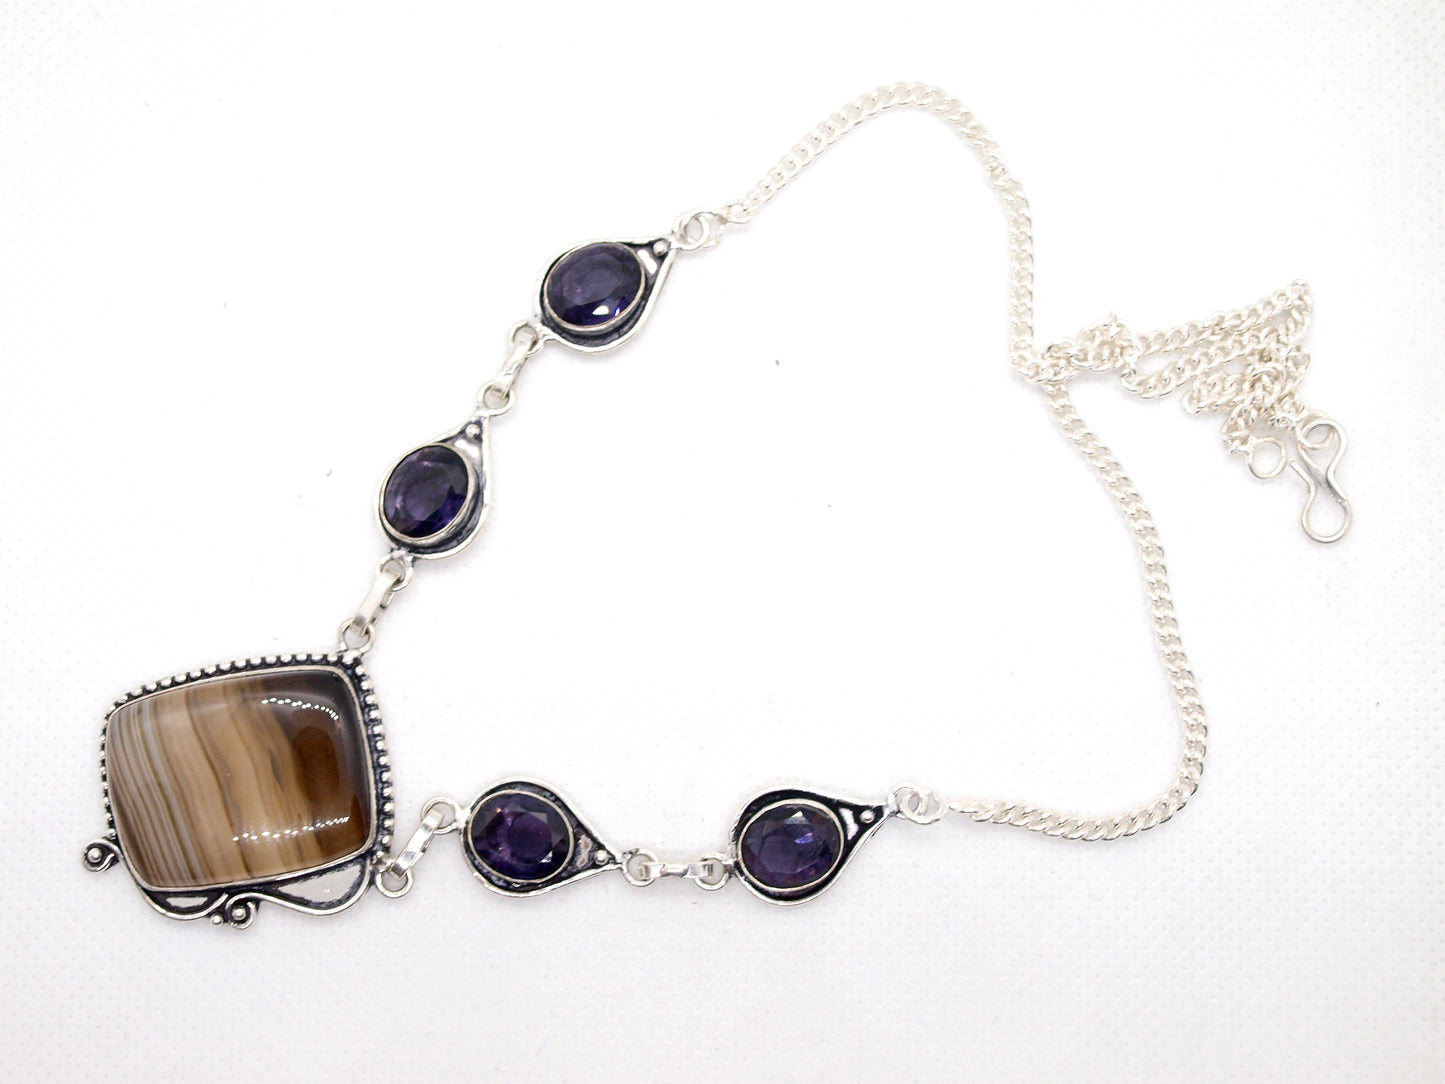 Agate and amethyst necklace